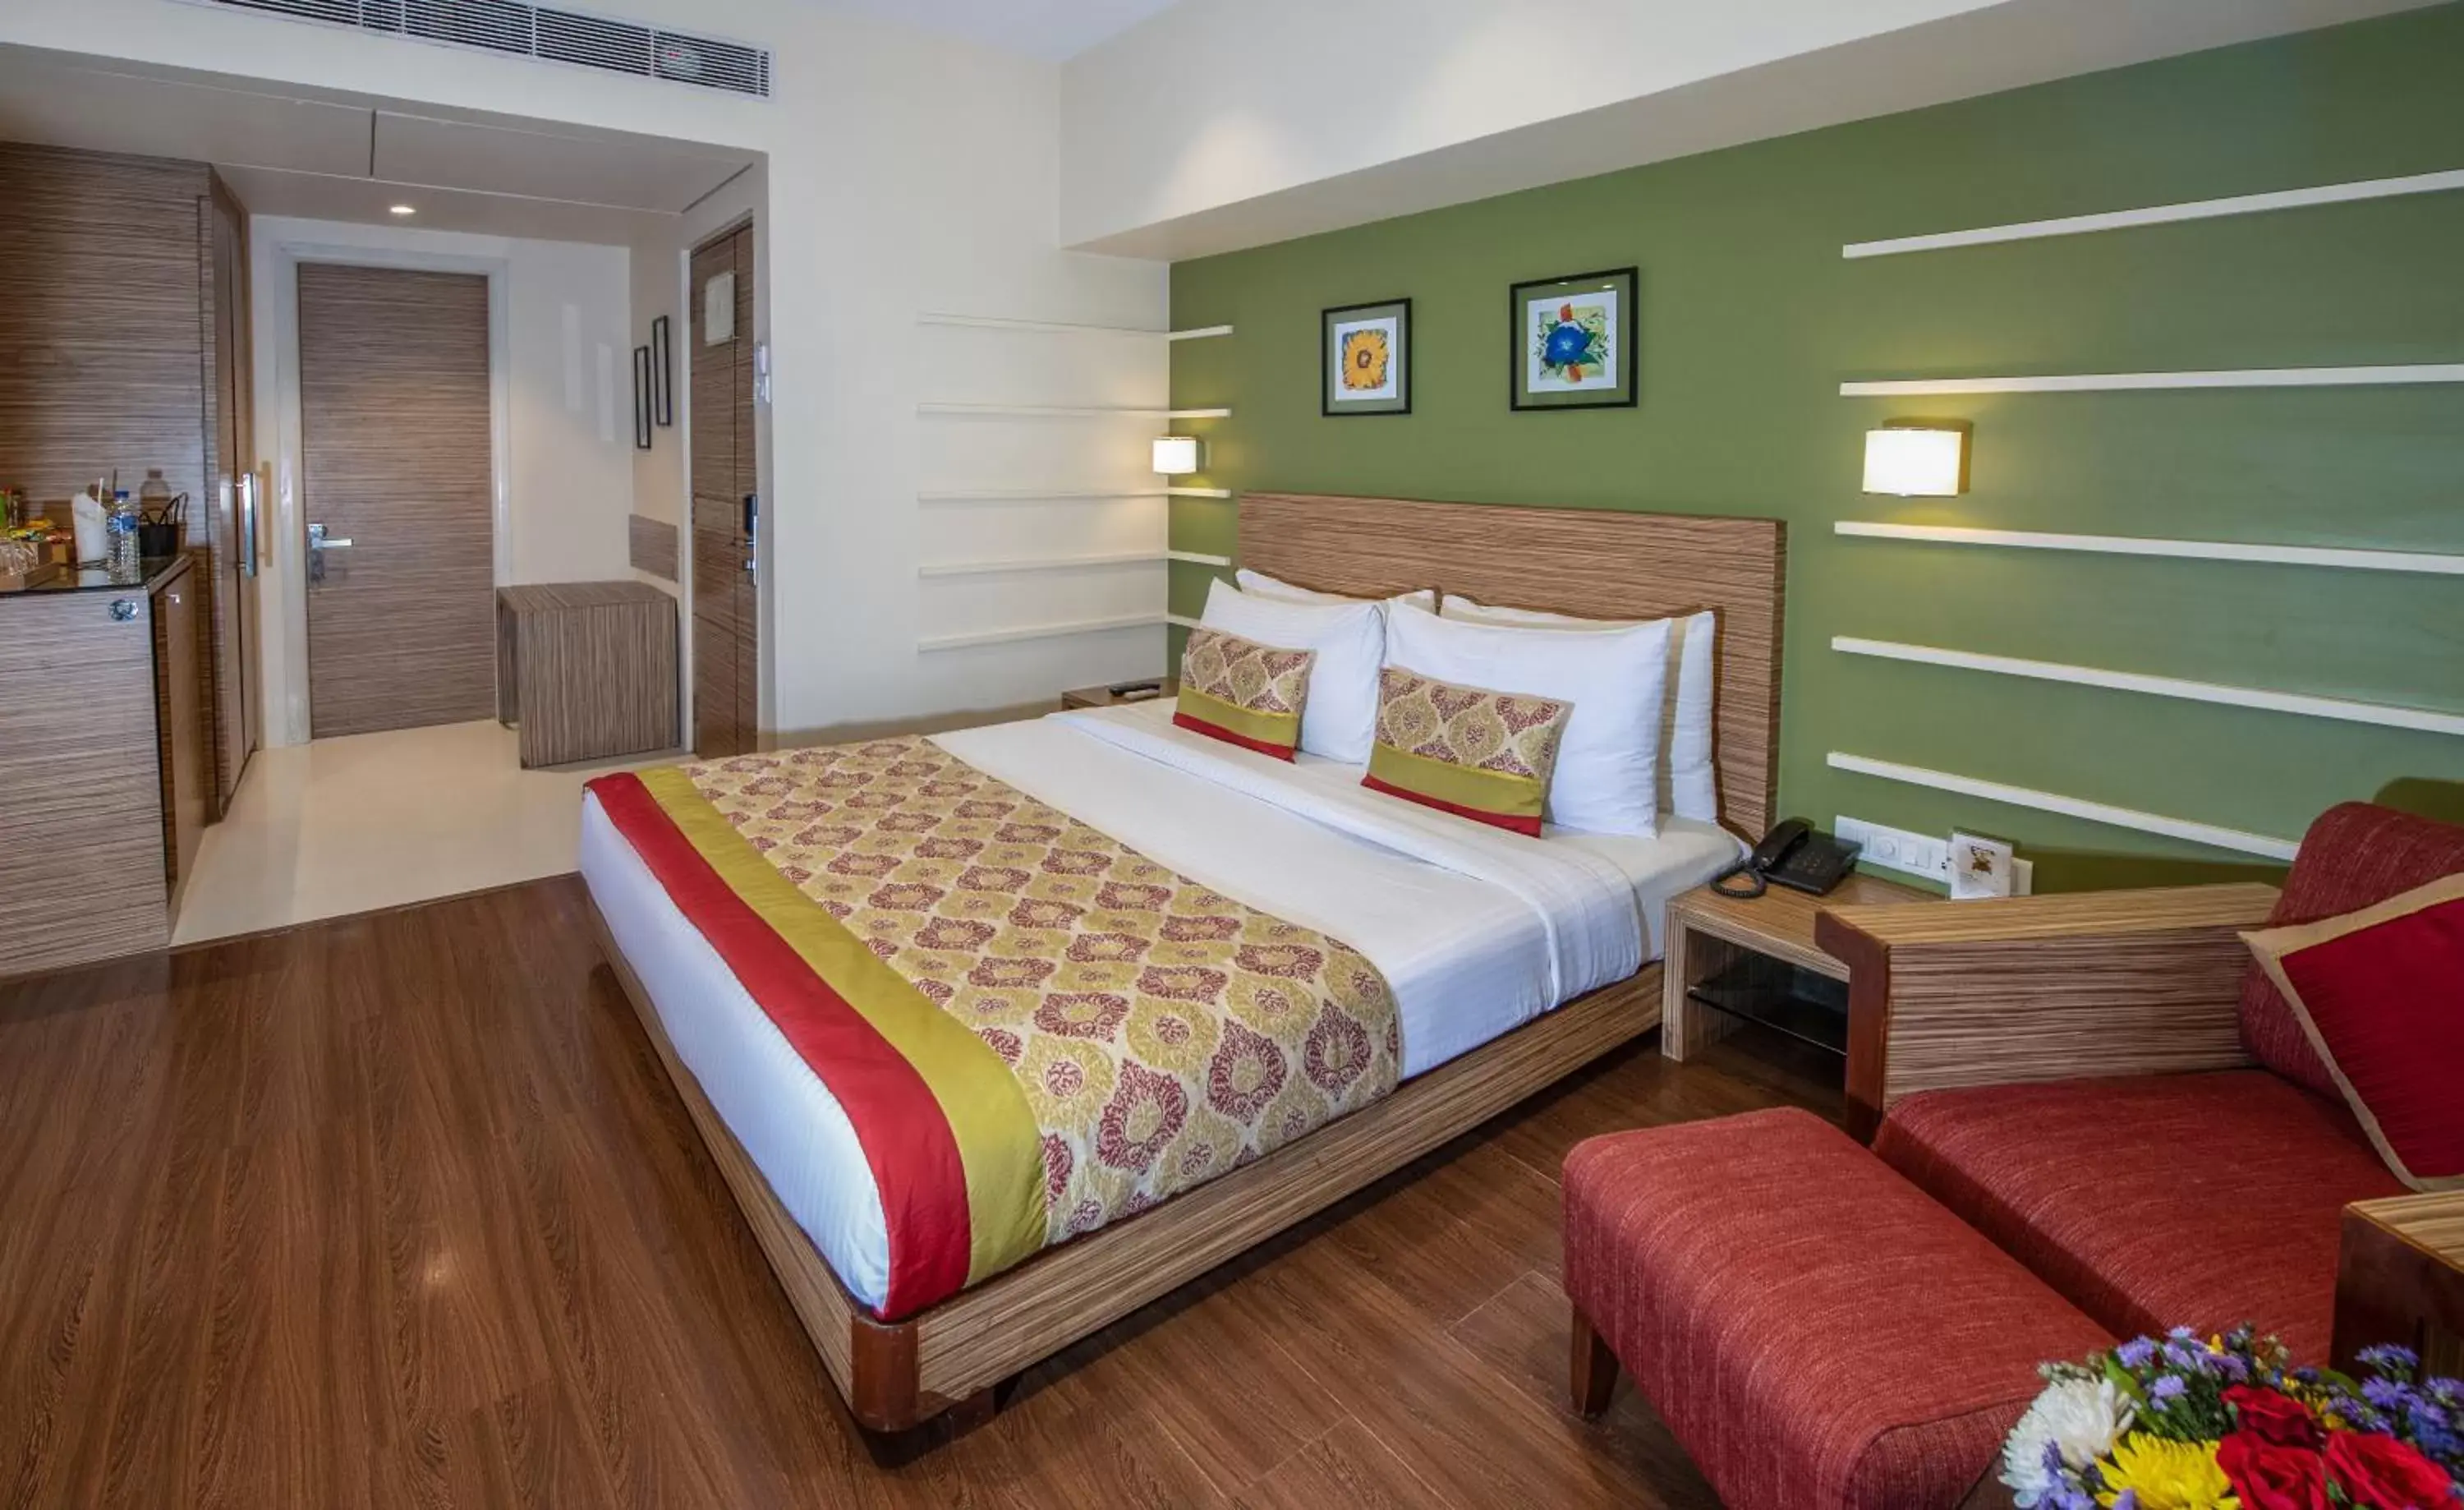 Bed in Hotel Bawa Suites